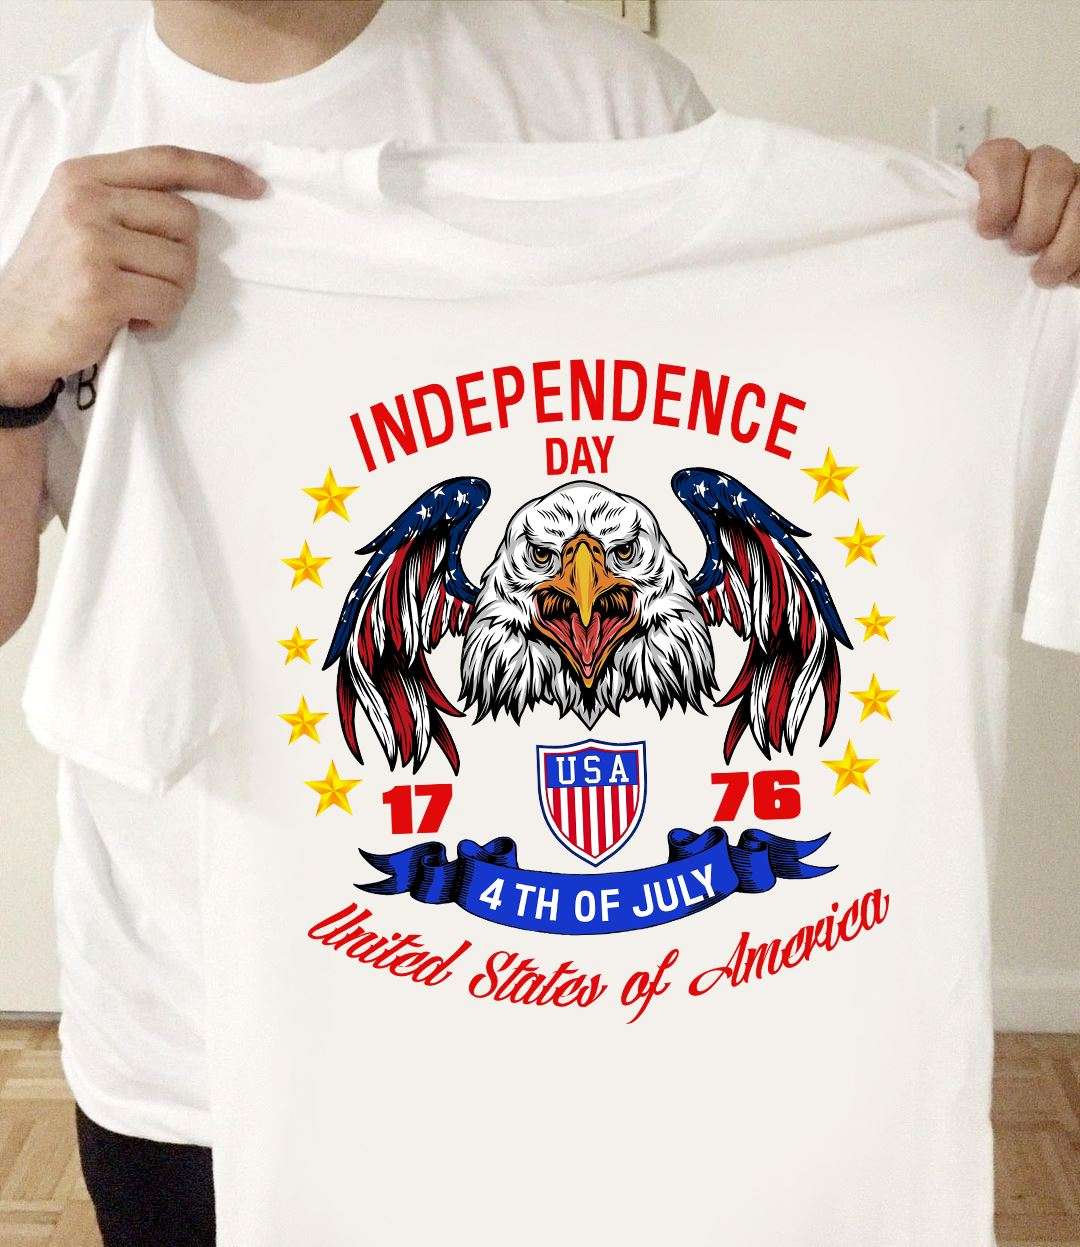 Independence day 4th of July - United States of America, America eagle symbol